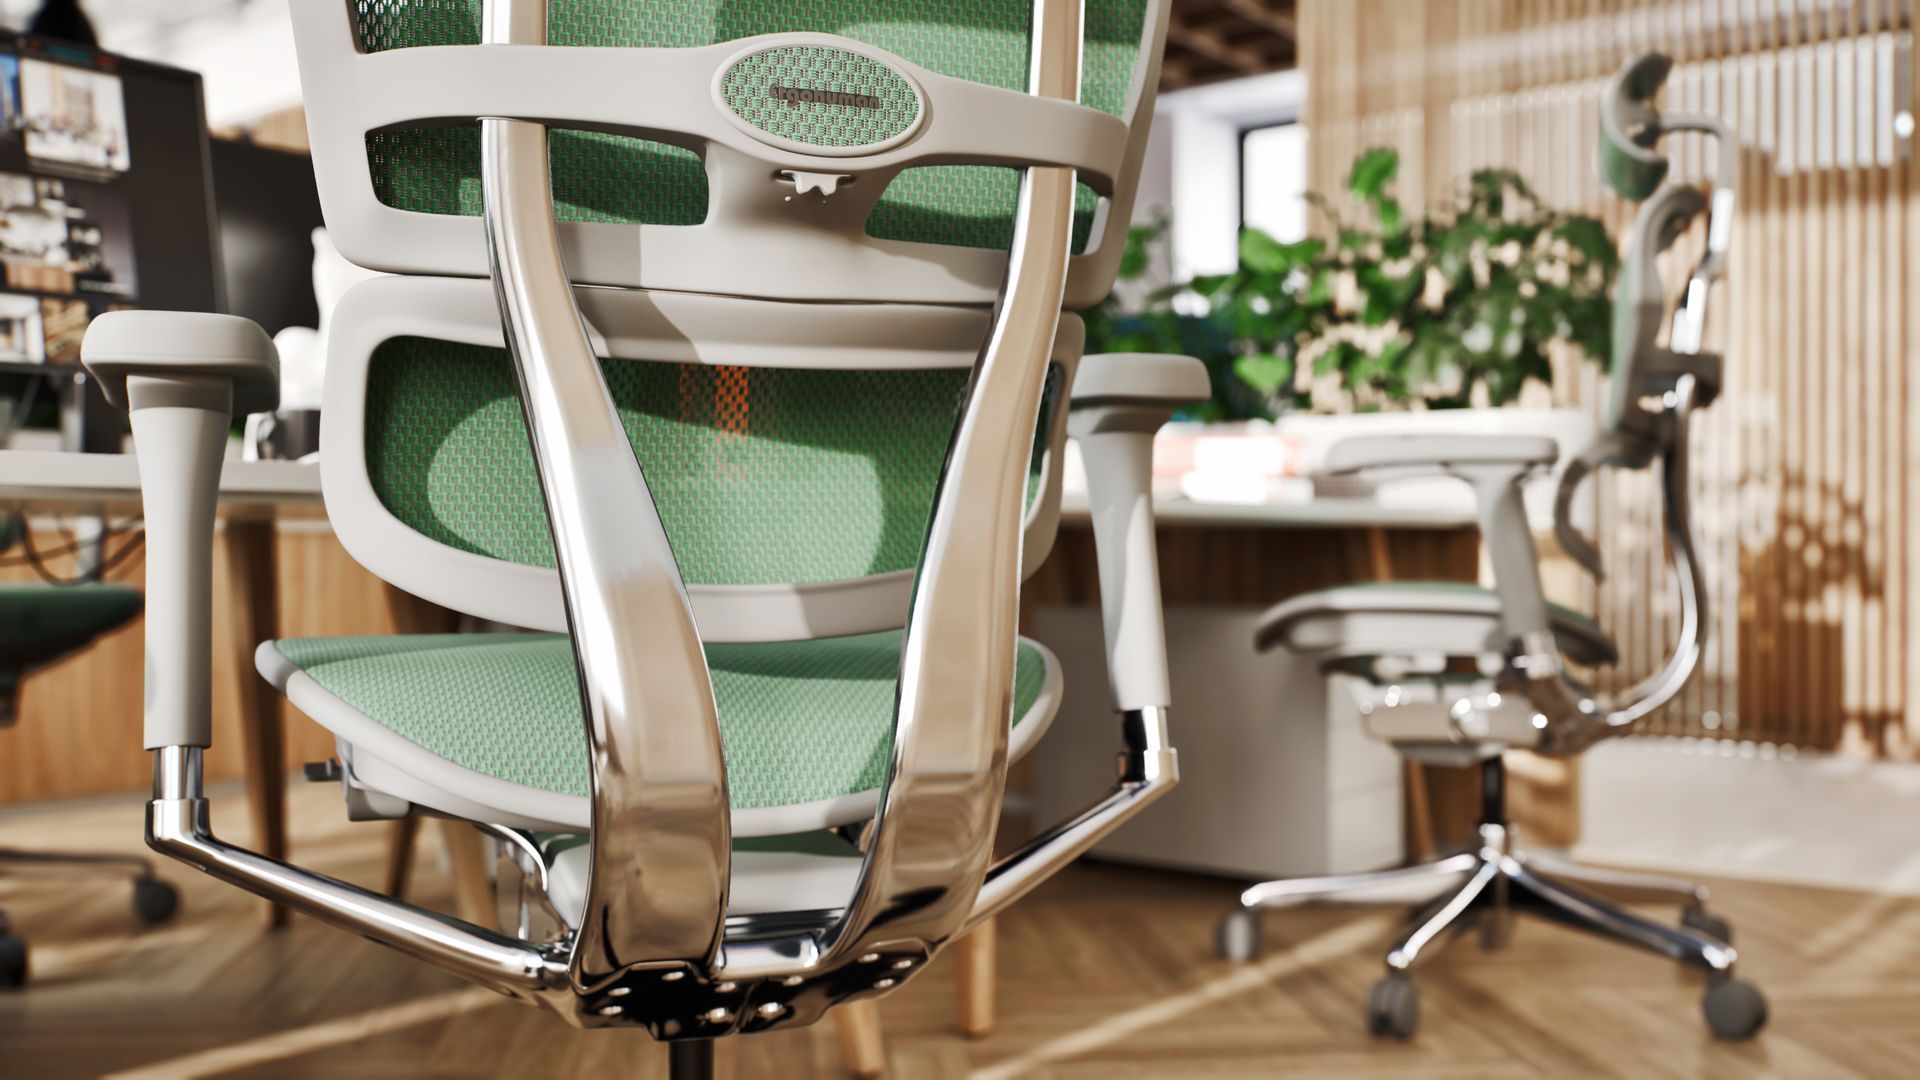 Close up of Ergohuman Elite ergonomic office chairs in grey frame with green mesh around a white desk table. The floor is herringbone wood. There are planters in the background